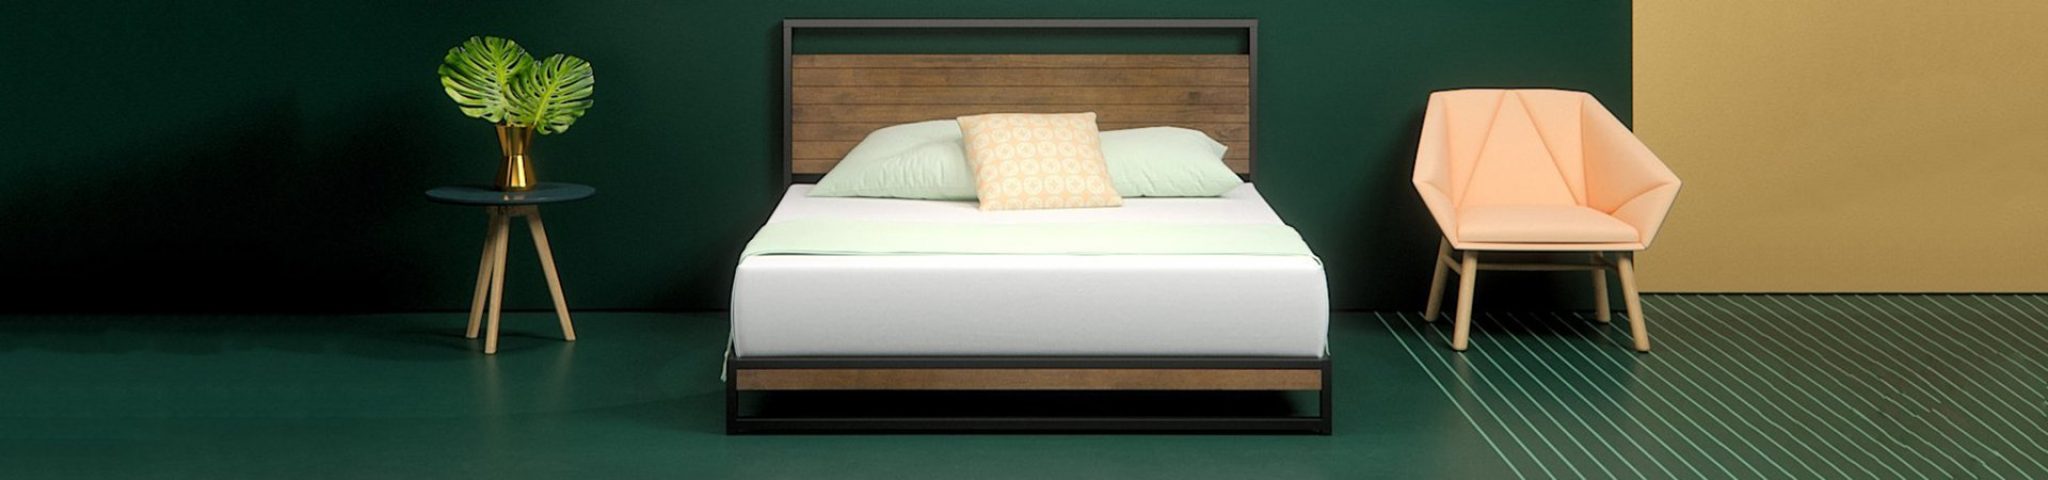 8 Best Bed Frames For Sex Reviewed In Detail Feb 2021﻿